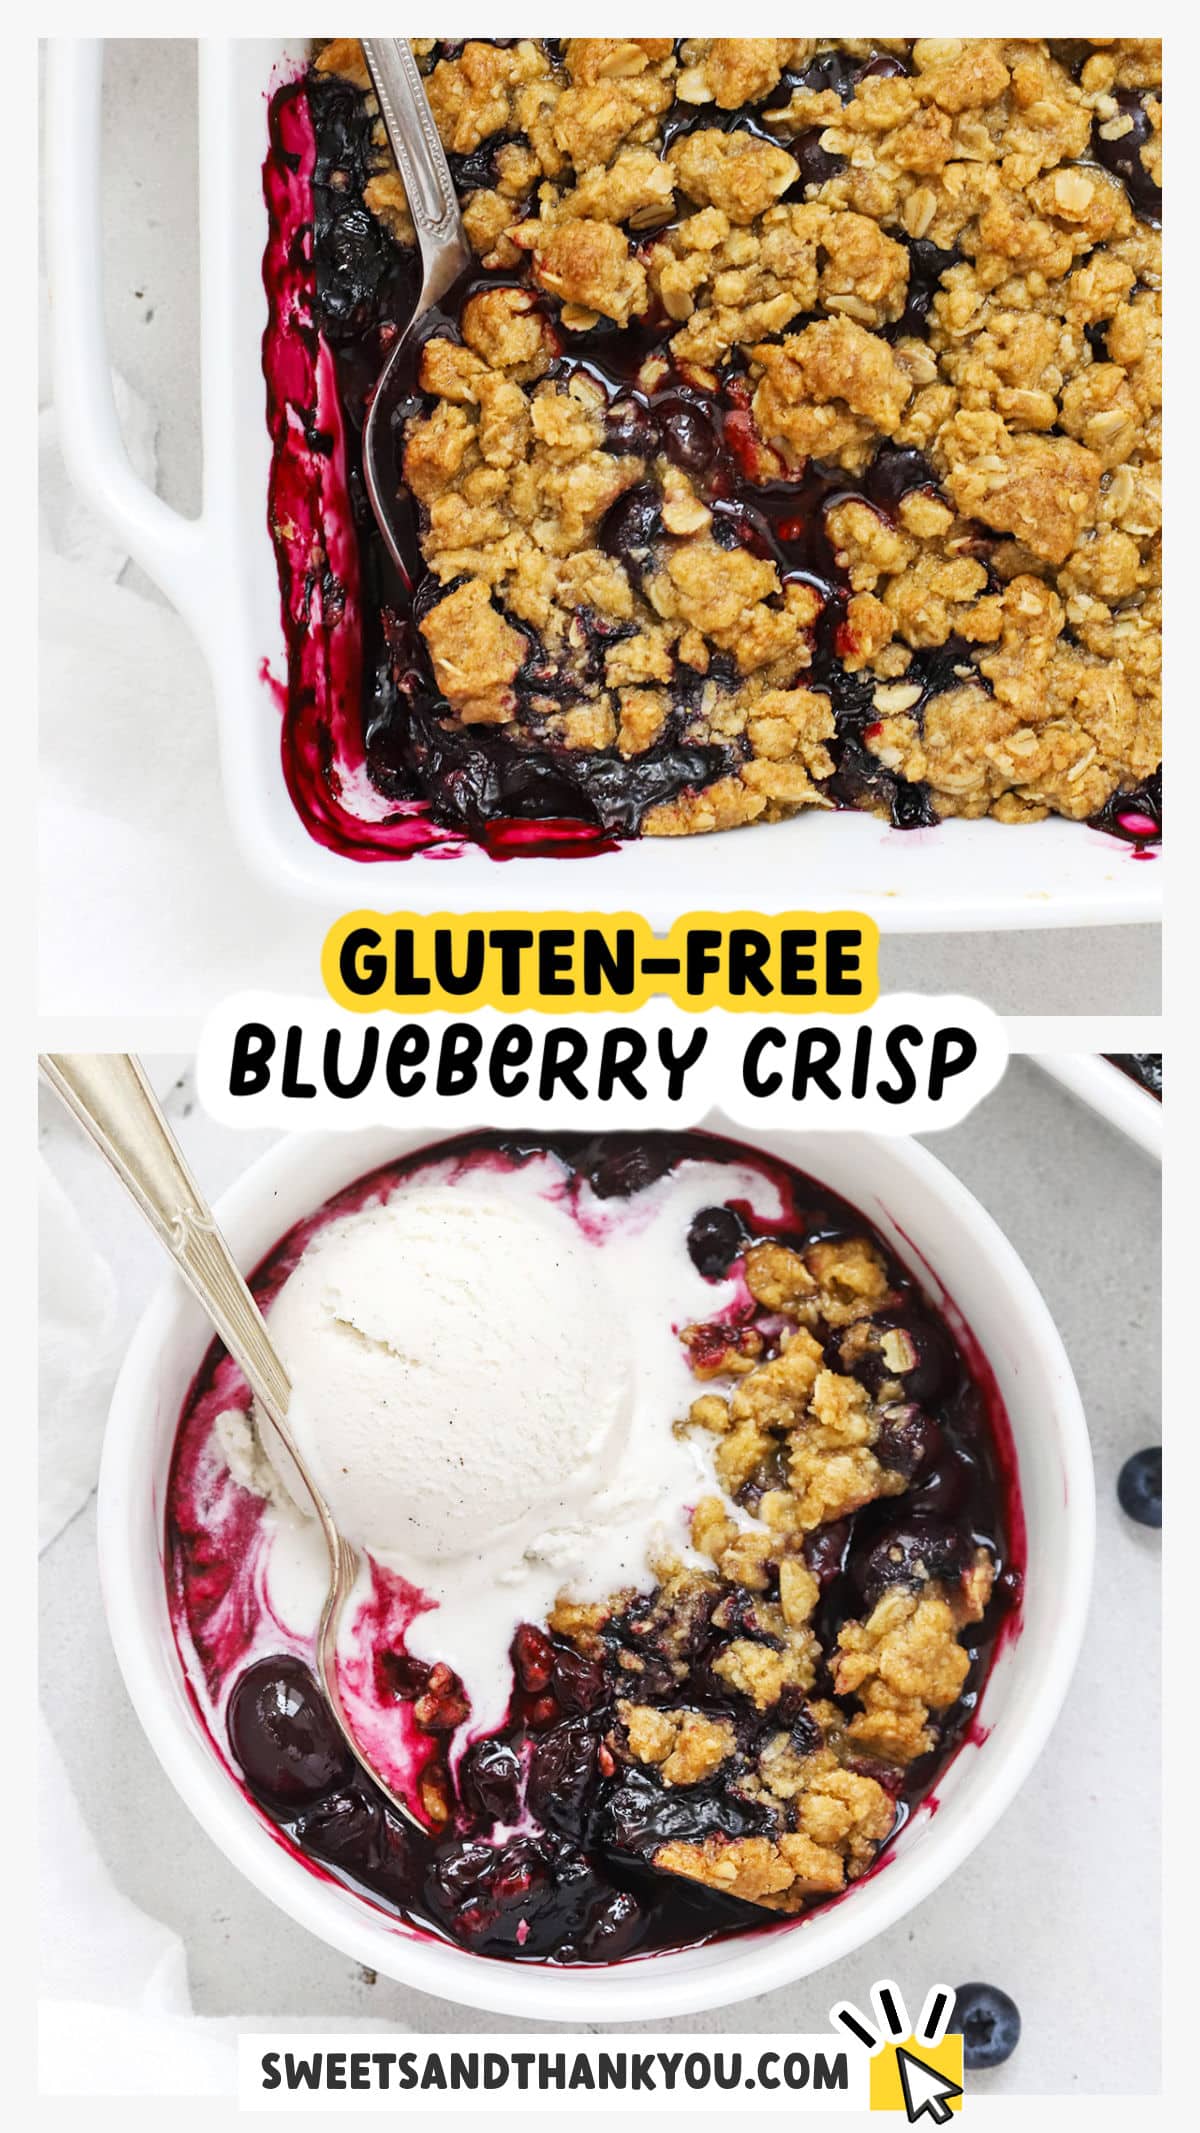 Gluten-Free Blueberry Crisp is the perfect spring or summer dessert. (You'll love the crispy crumble topping.) With its jammy blueberry filling and crispy oat crumble topping, our easy blueberry crumble recipe is a total delight from start to finish. (Especially when you pair it with a scoop of vanilla ice cream!) Get the recipe and a few tasty variations to try at sweetsandthankyou.com